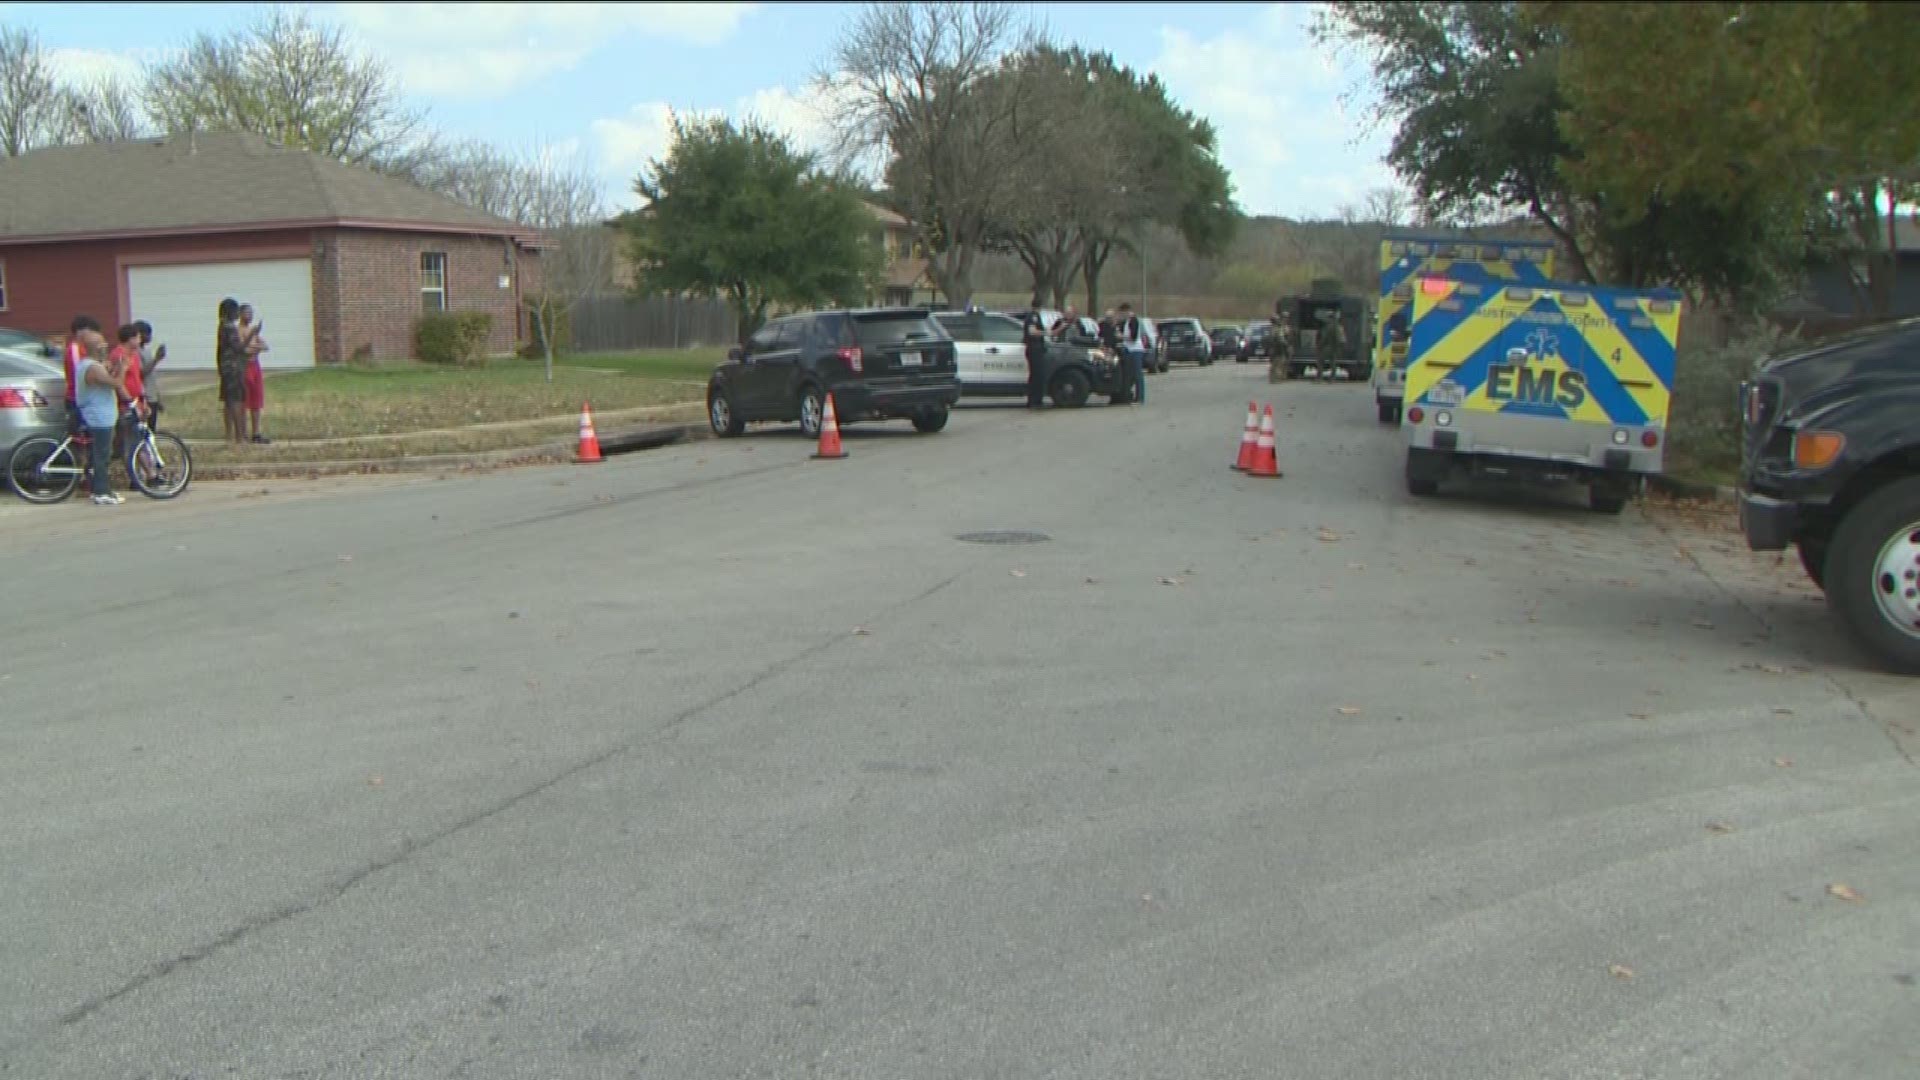 Police have someone in custody after a SWAT situation ended peacefully in East Austin on Saturday afternoon.